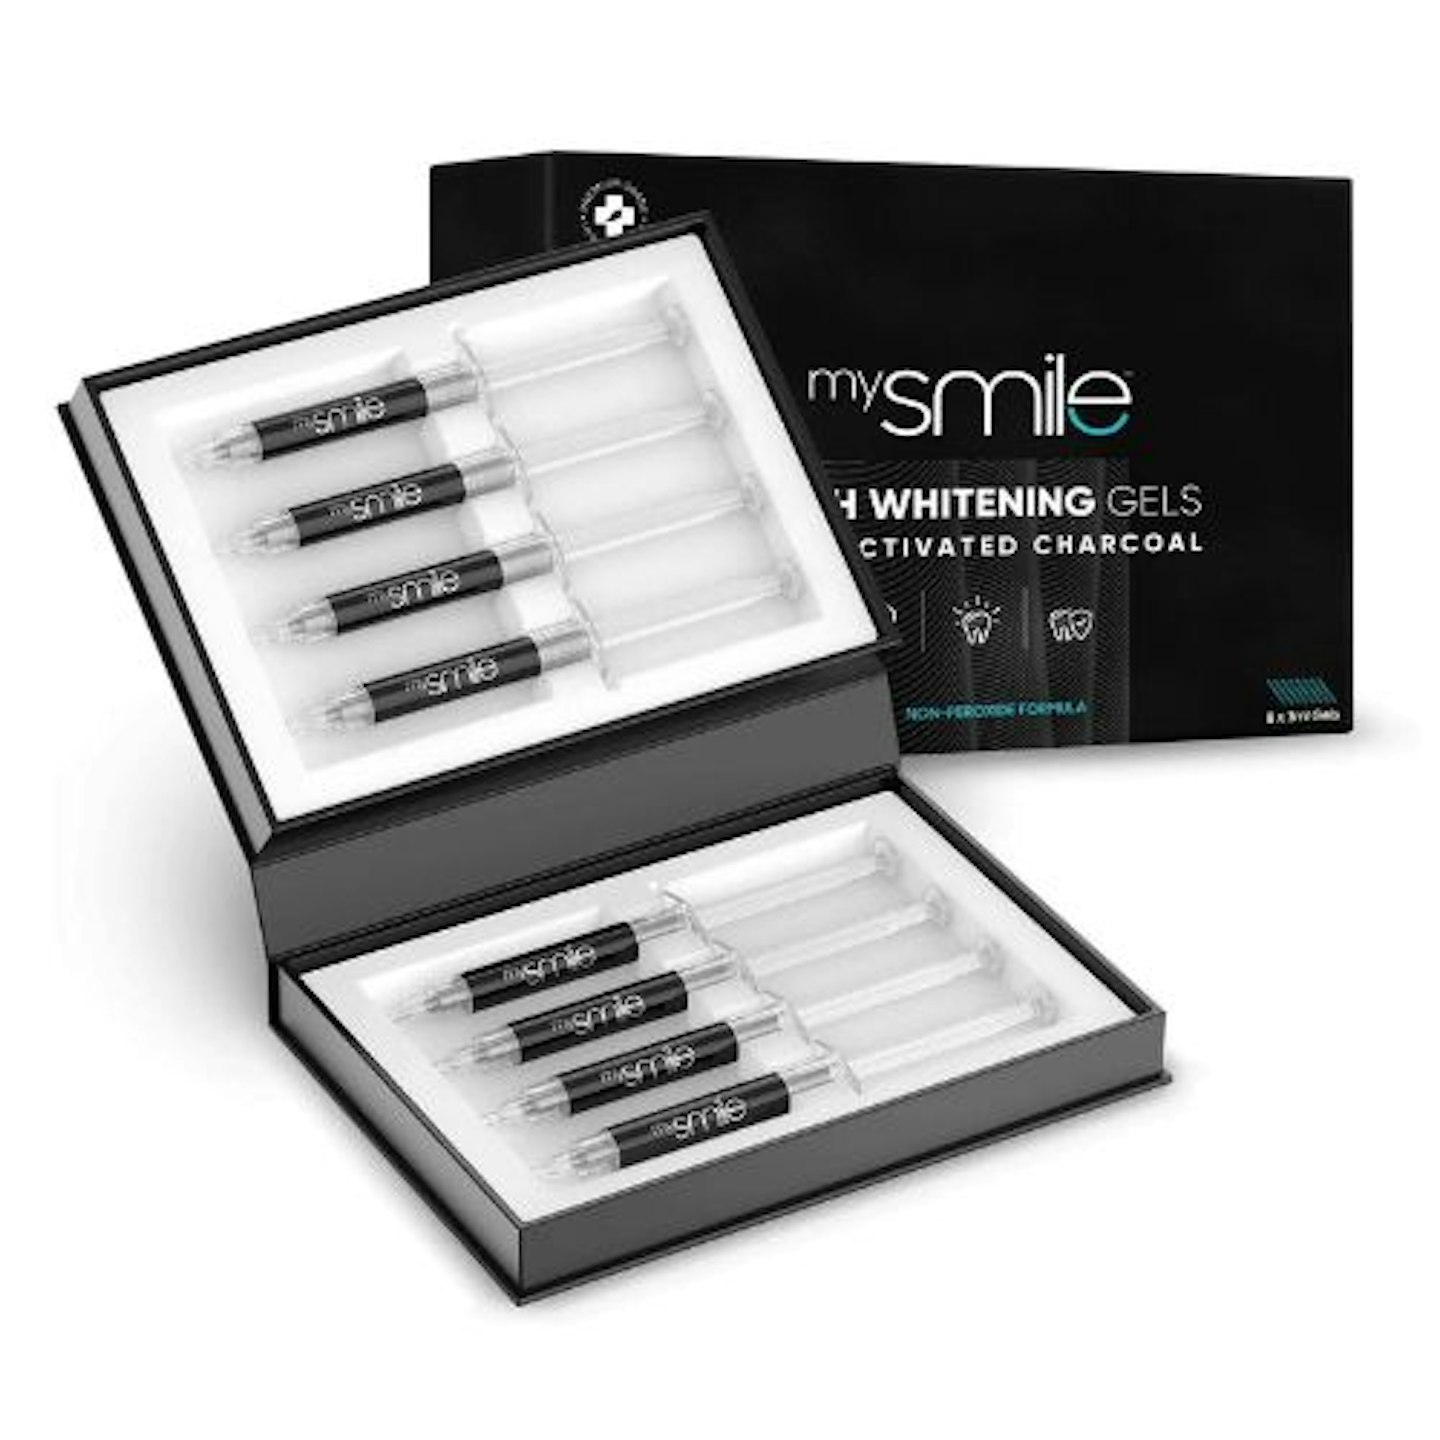 mysmile Activated Charcoal Teeth Whitening Gel Refills